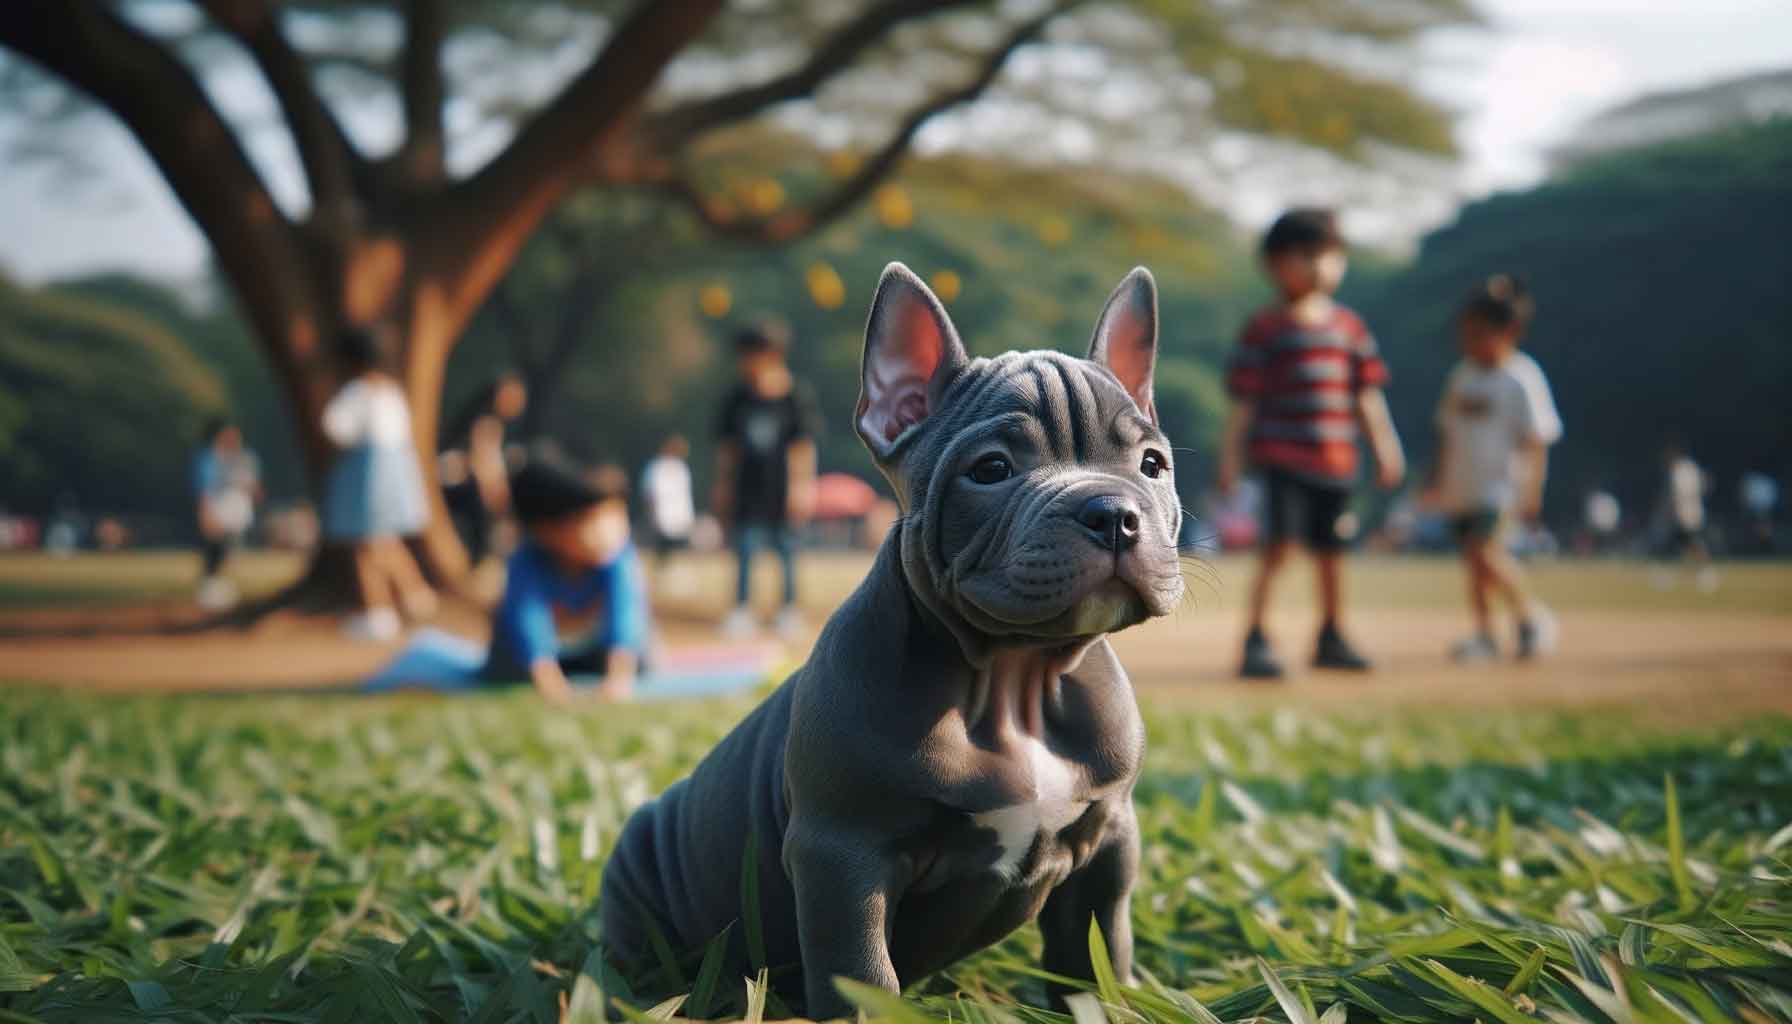 A Blue Micro Bully standing in a grassy park, with sunlit fur, as children play in the background.